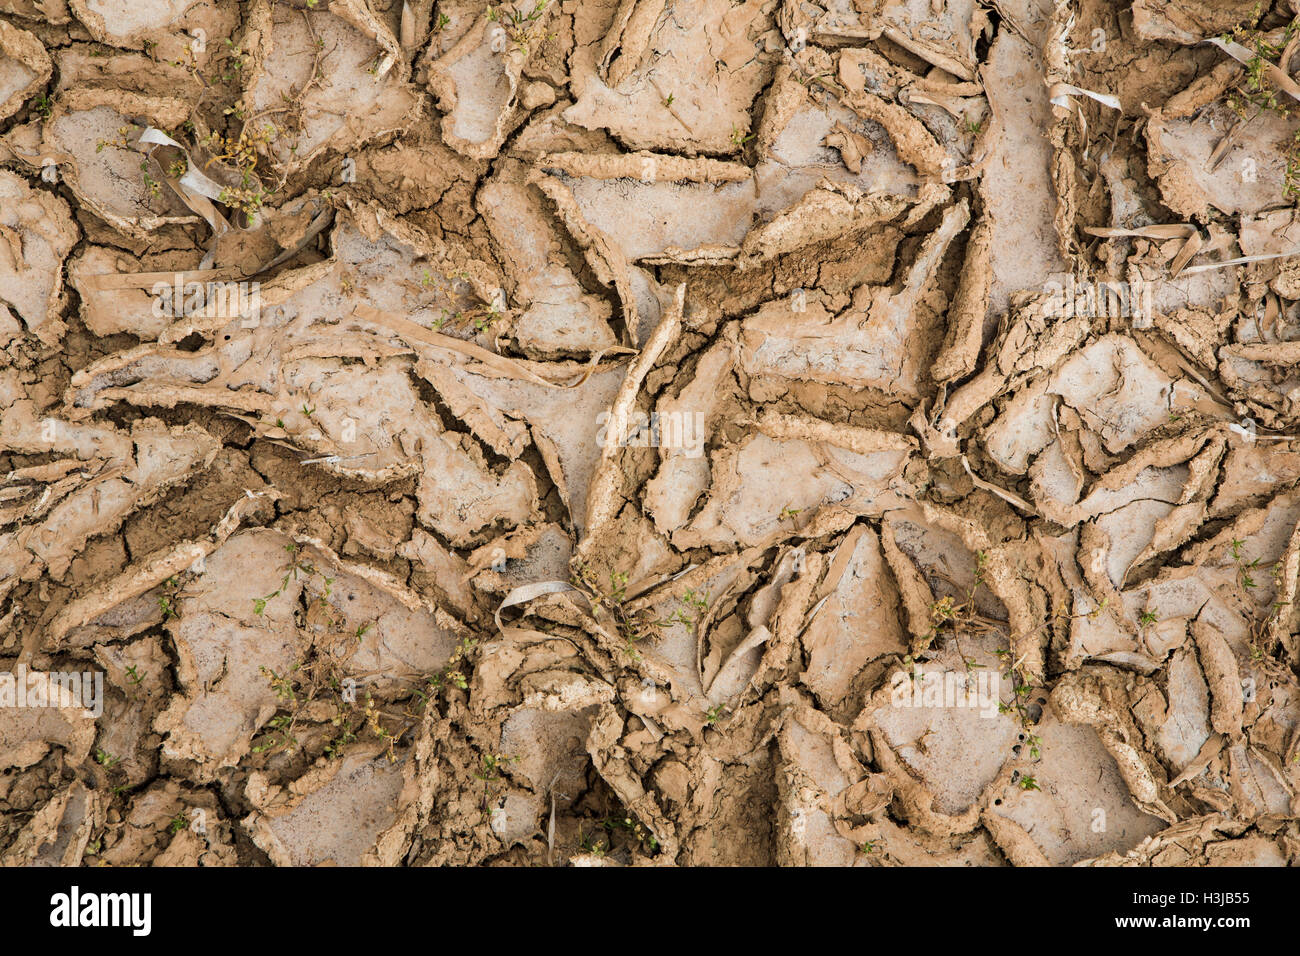 Cracks in the mud appear as the dry earth is baked under a hot sun in Greece. Stock Photo